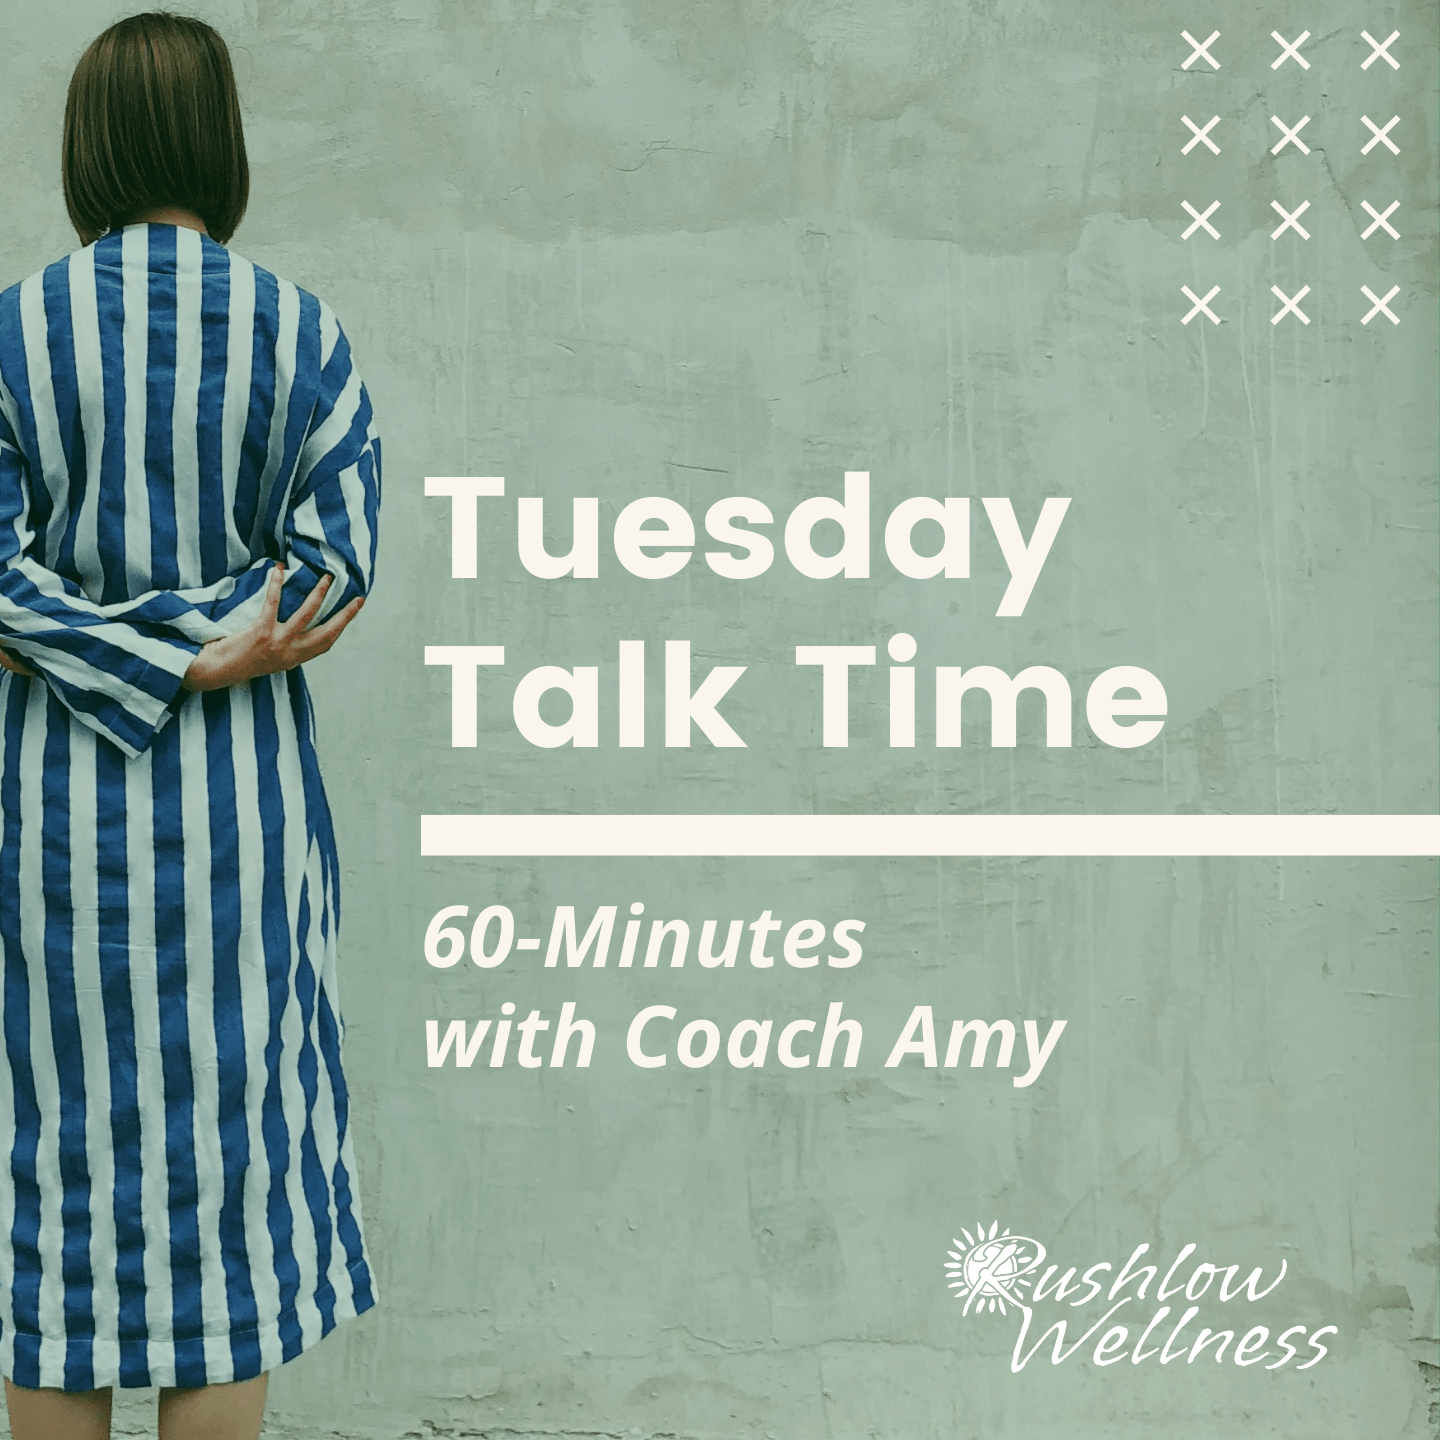 Tuesday Talk Time: 60-Minutes